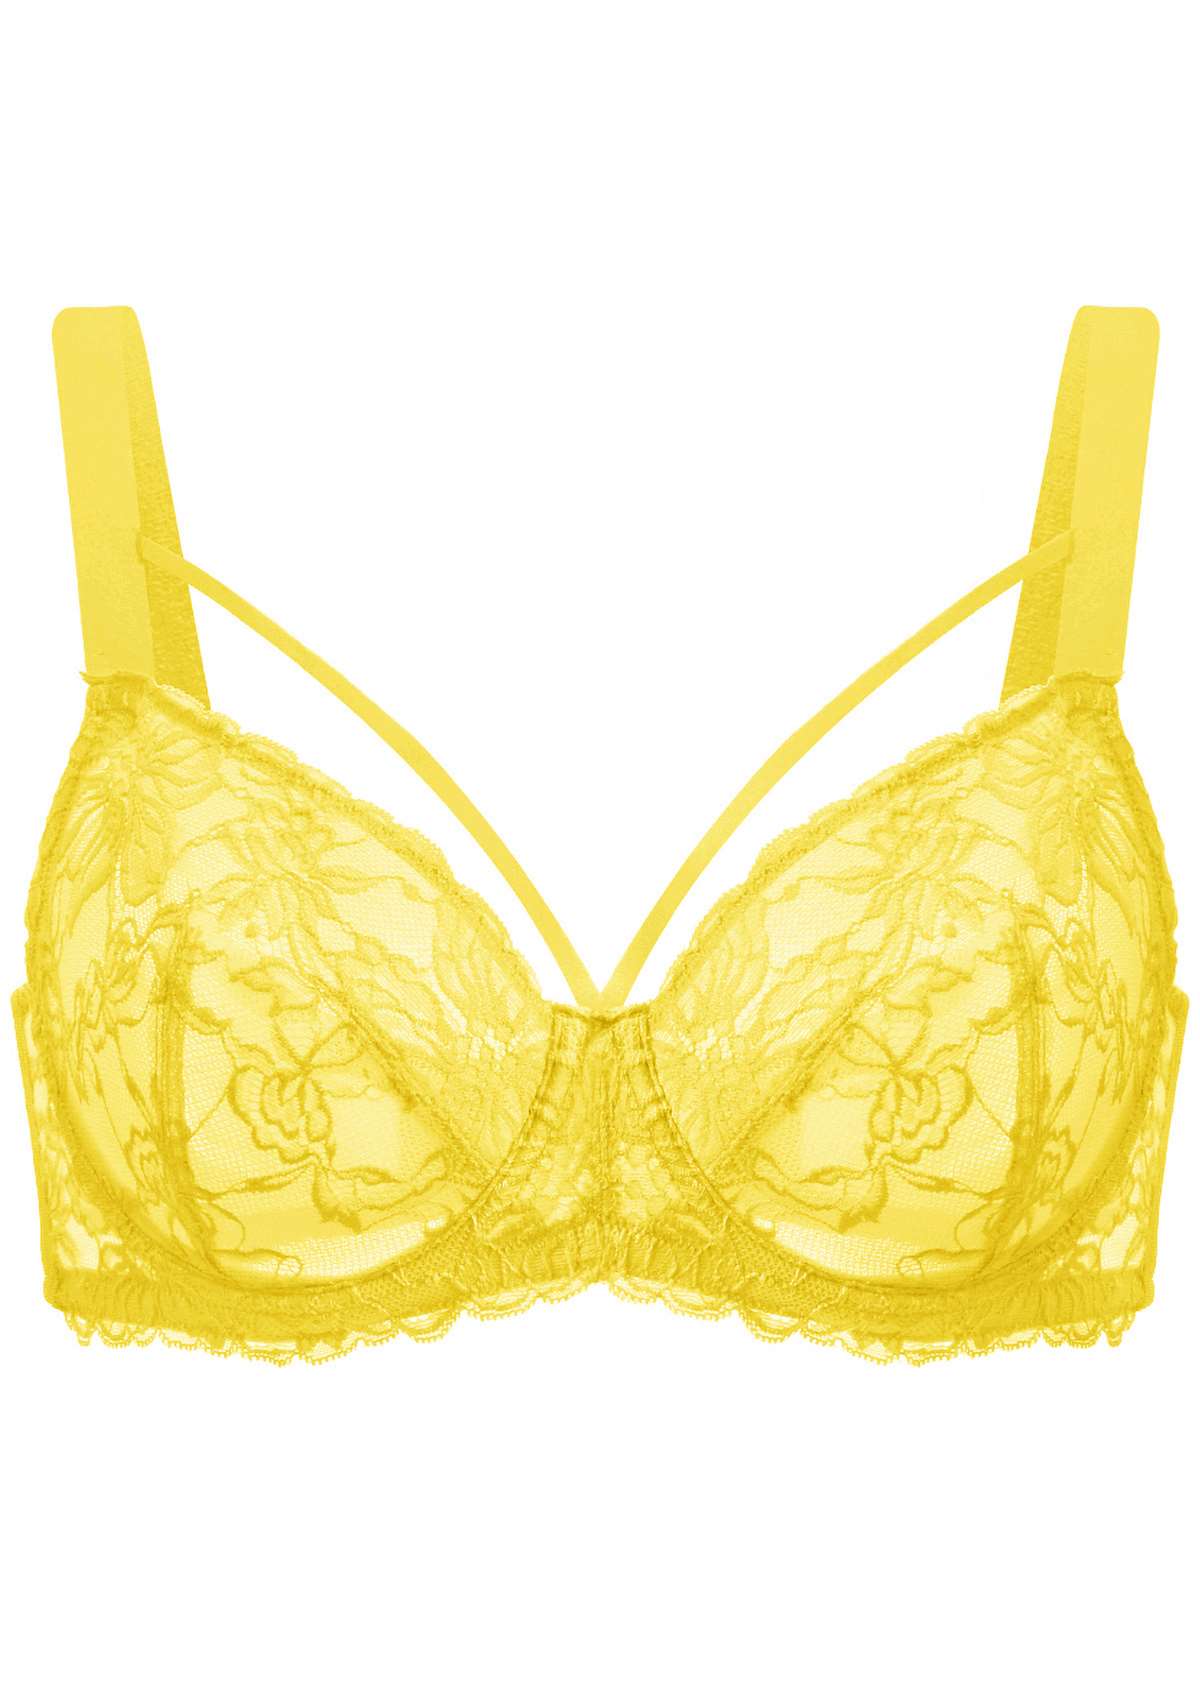 HSIA Unlined Lace Mesh Minimizer Bra For Large Breasts, Full Coverage - Bright Yellow / 36 / H